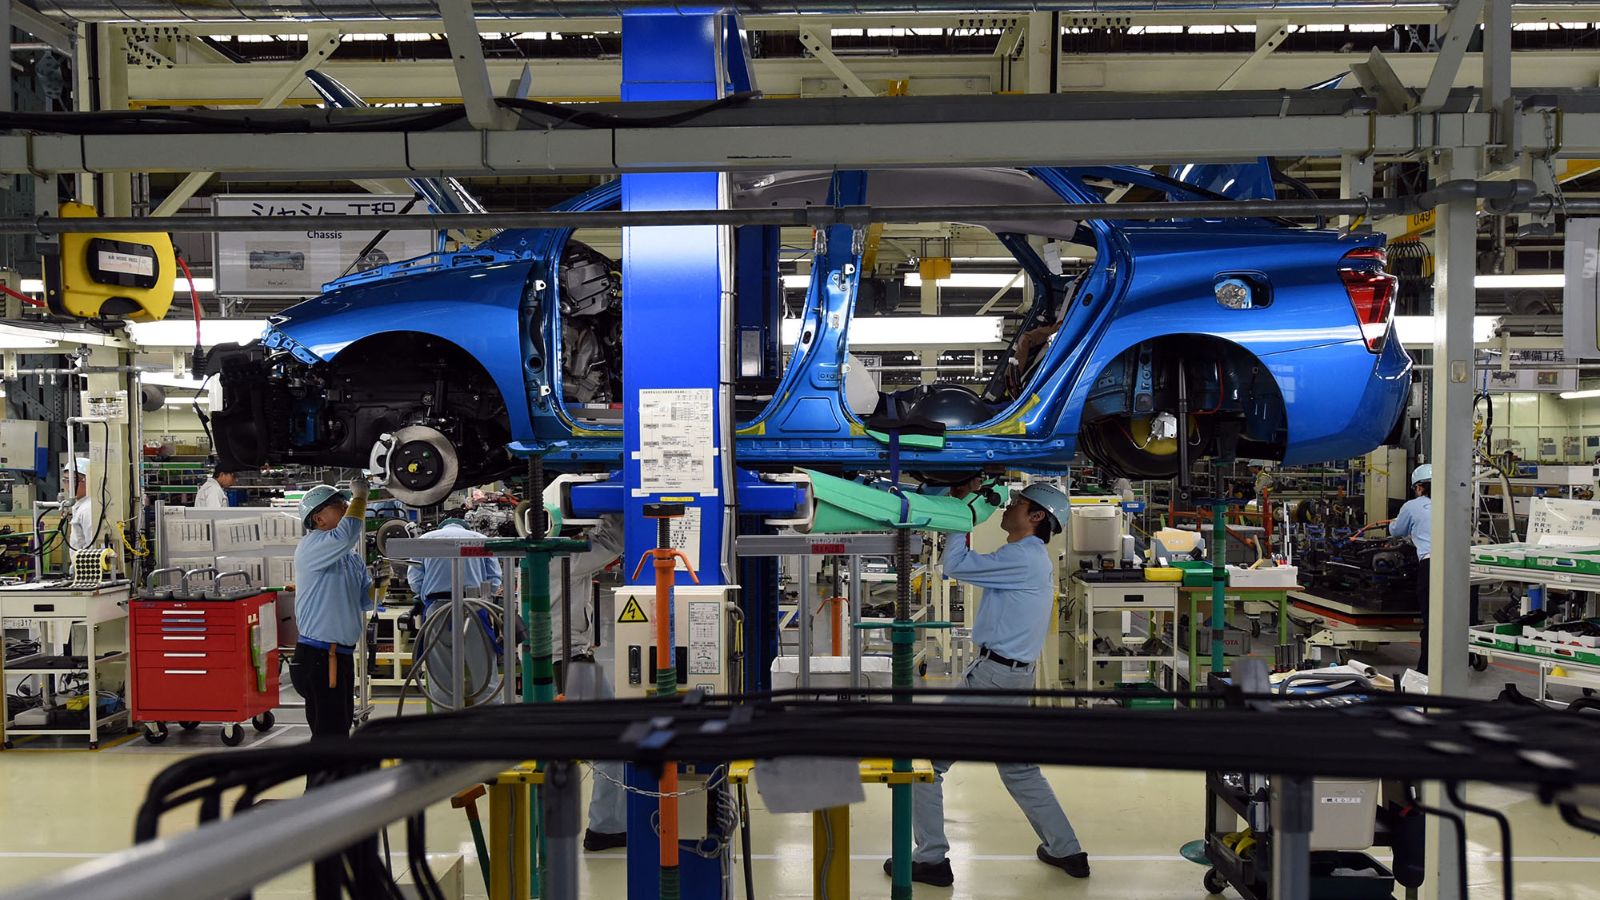 Employees of Toyota Motors assemble the FCV "Mirai" on the assembly line during the vehicle's line off ceremony at the Motomachi factory in Toyota city, Aichi prefecture on February 24, 2015. The world's biggest carmaker plans to produce 700 units of the four-door Mirai sedan -- powered by hydrogen and emitting nothing but water vapour from its tailpipe -- by the end of December. AFP PHOTO / TOSHIFUMI KITAMURA (Photo by Toshifumi KITAMURA / AFP)